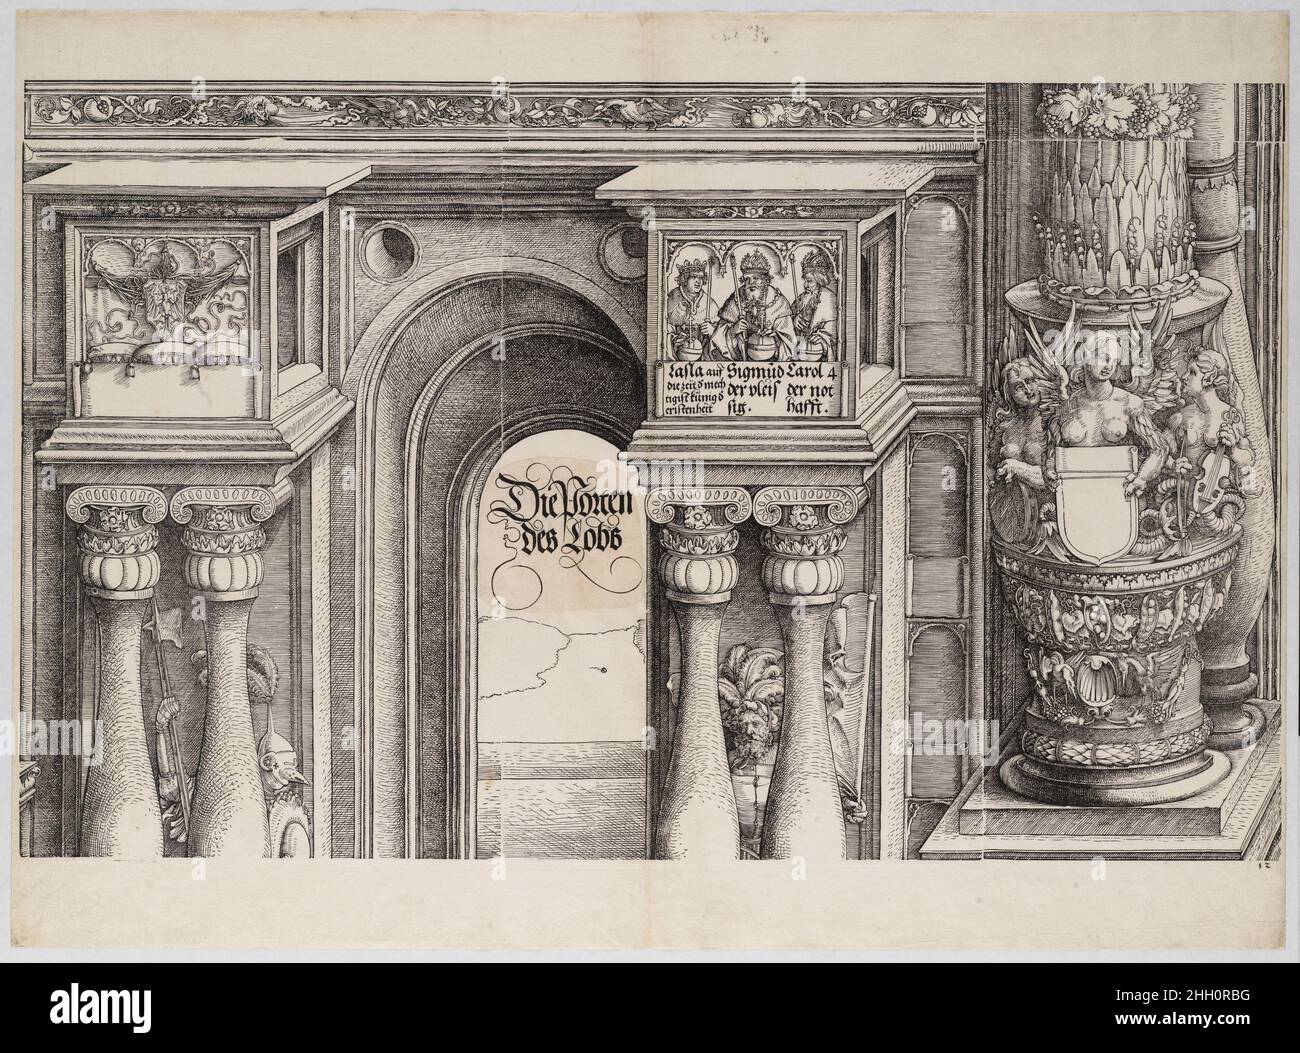 The Arch in the Entryway of the Left Portal (Die Porten des Lobs); and the Outer Left Column of the Central Portal, from the Arch of Honor, proof, dated 1515, printed 1517-18 1515 Hans Springinklee. The Arch in the Entryway of the Left Portal (Die Porten des Lobs); and the Outer Left Column of the Central Portal, from the Arch of Honor, proof, dated 1515, printed 1517-18. Hans Springinklee (German, ca. 1495–after 1522). 1515. Woodcut and letterpress. Prints Stock Photo